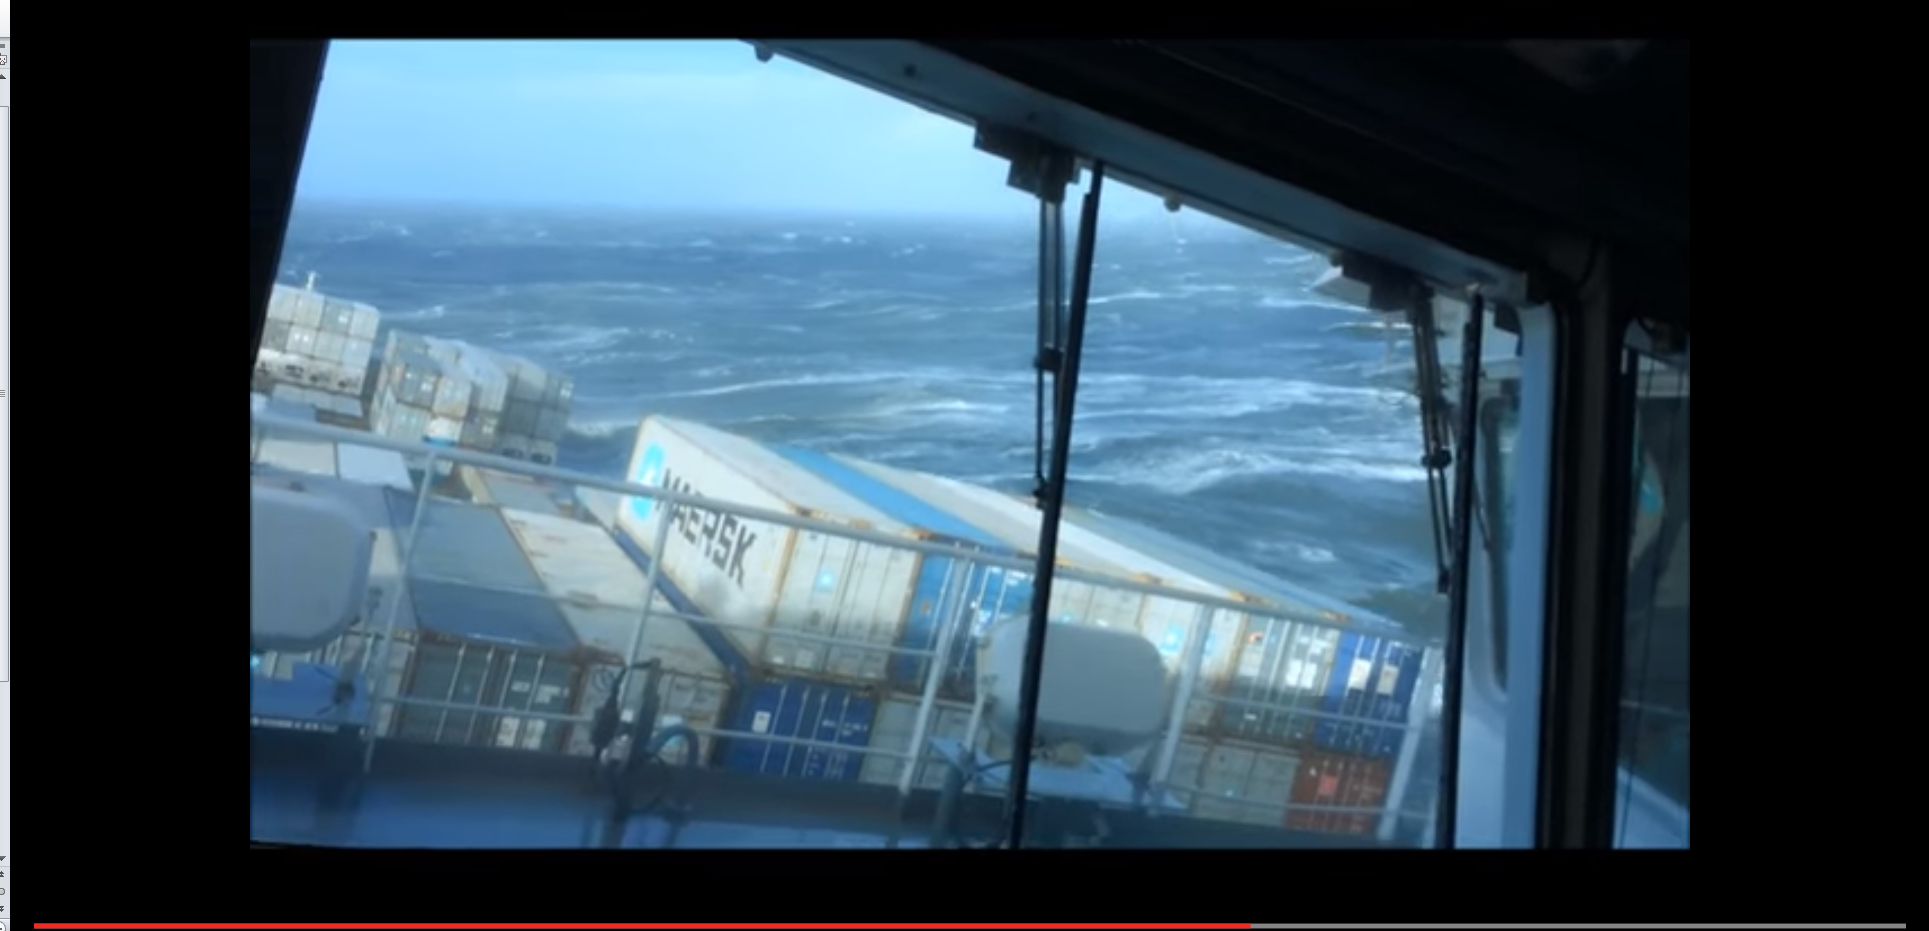 Choppy waves hit this vessel in the North Sea